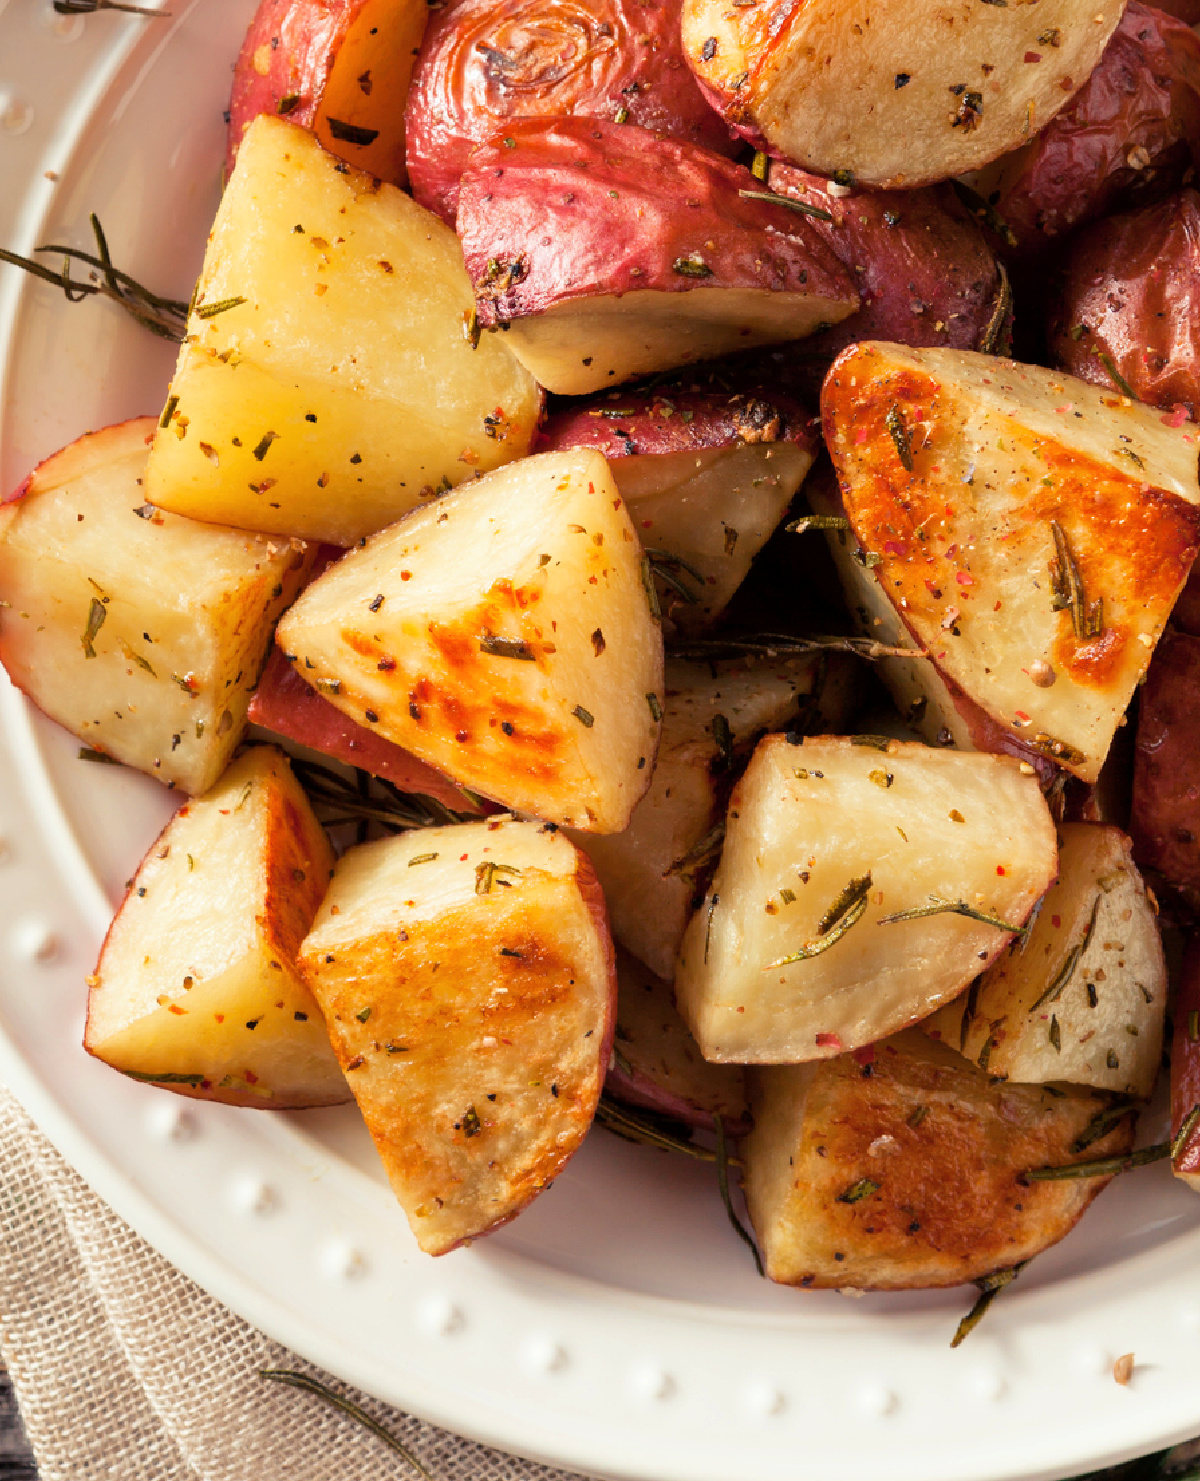 Skillet roasted red potatoes